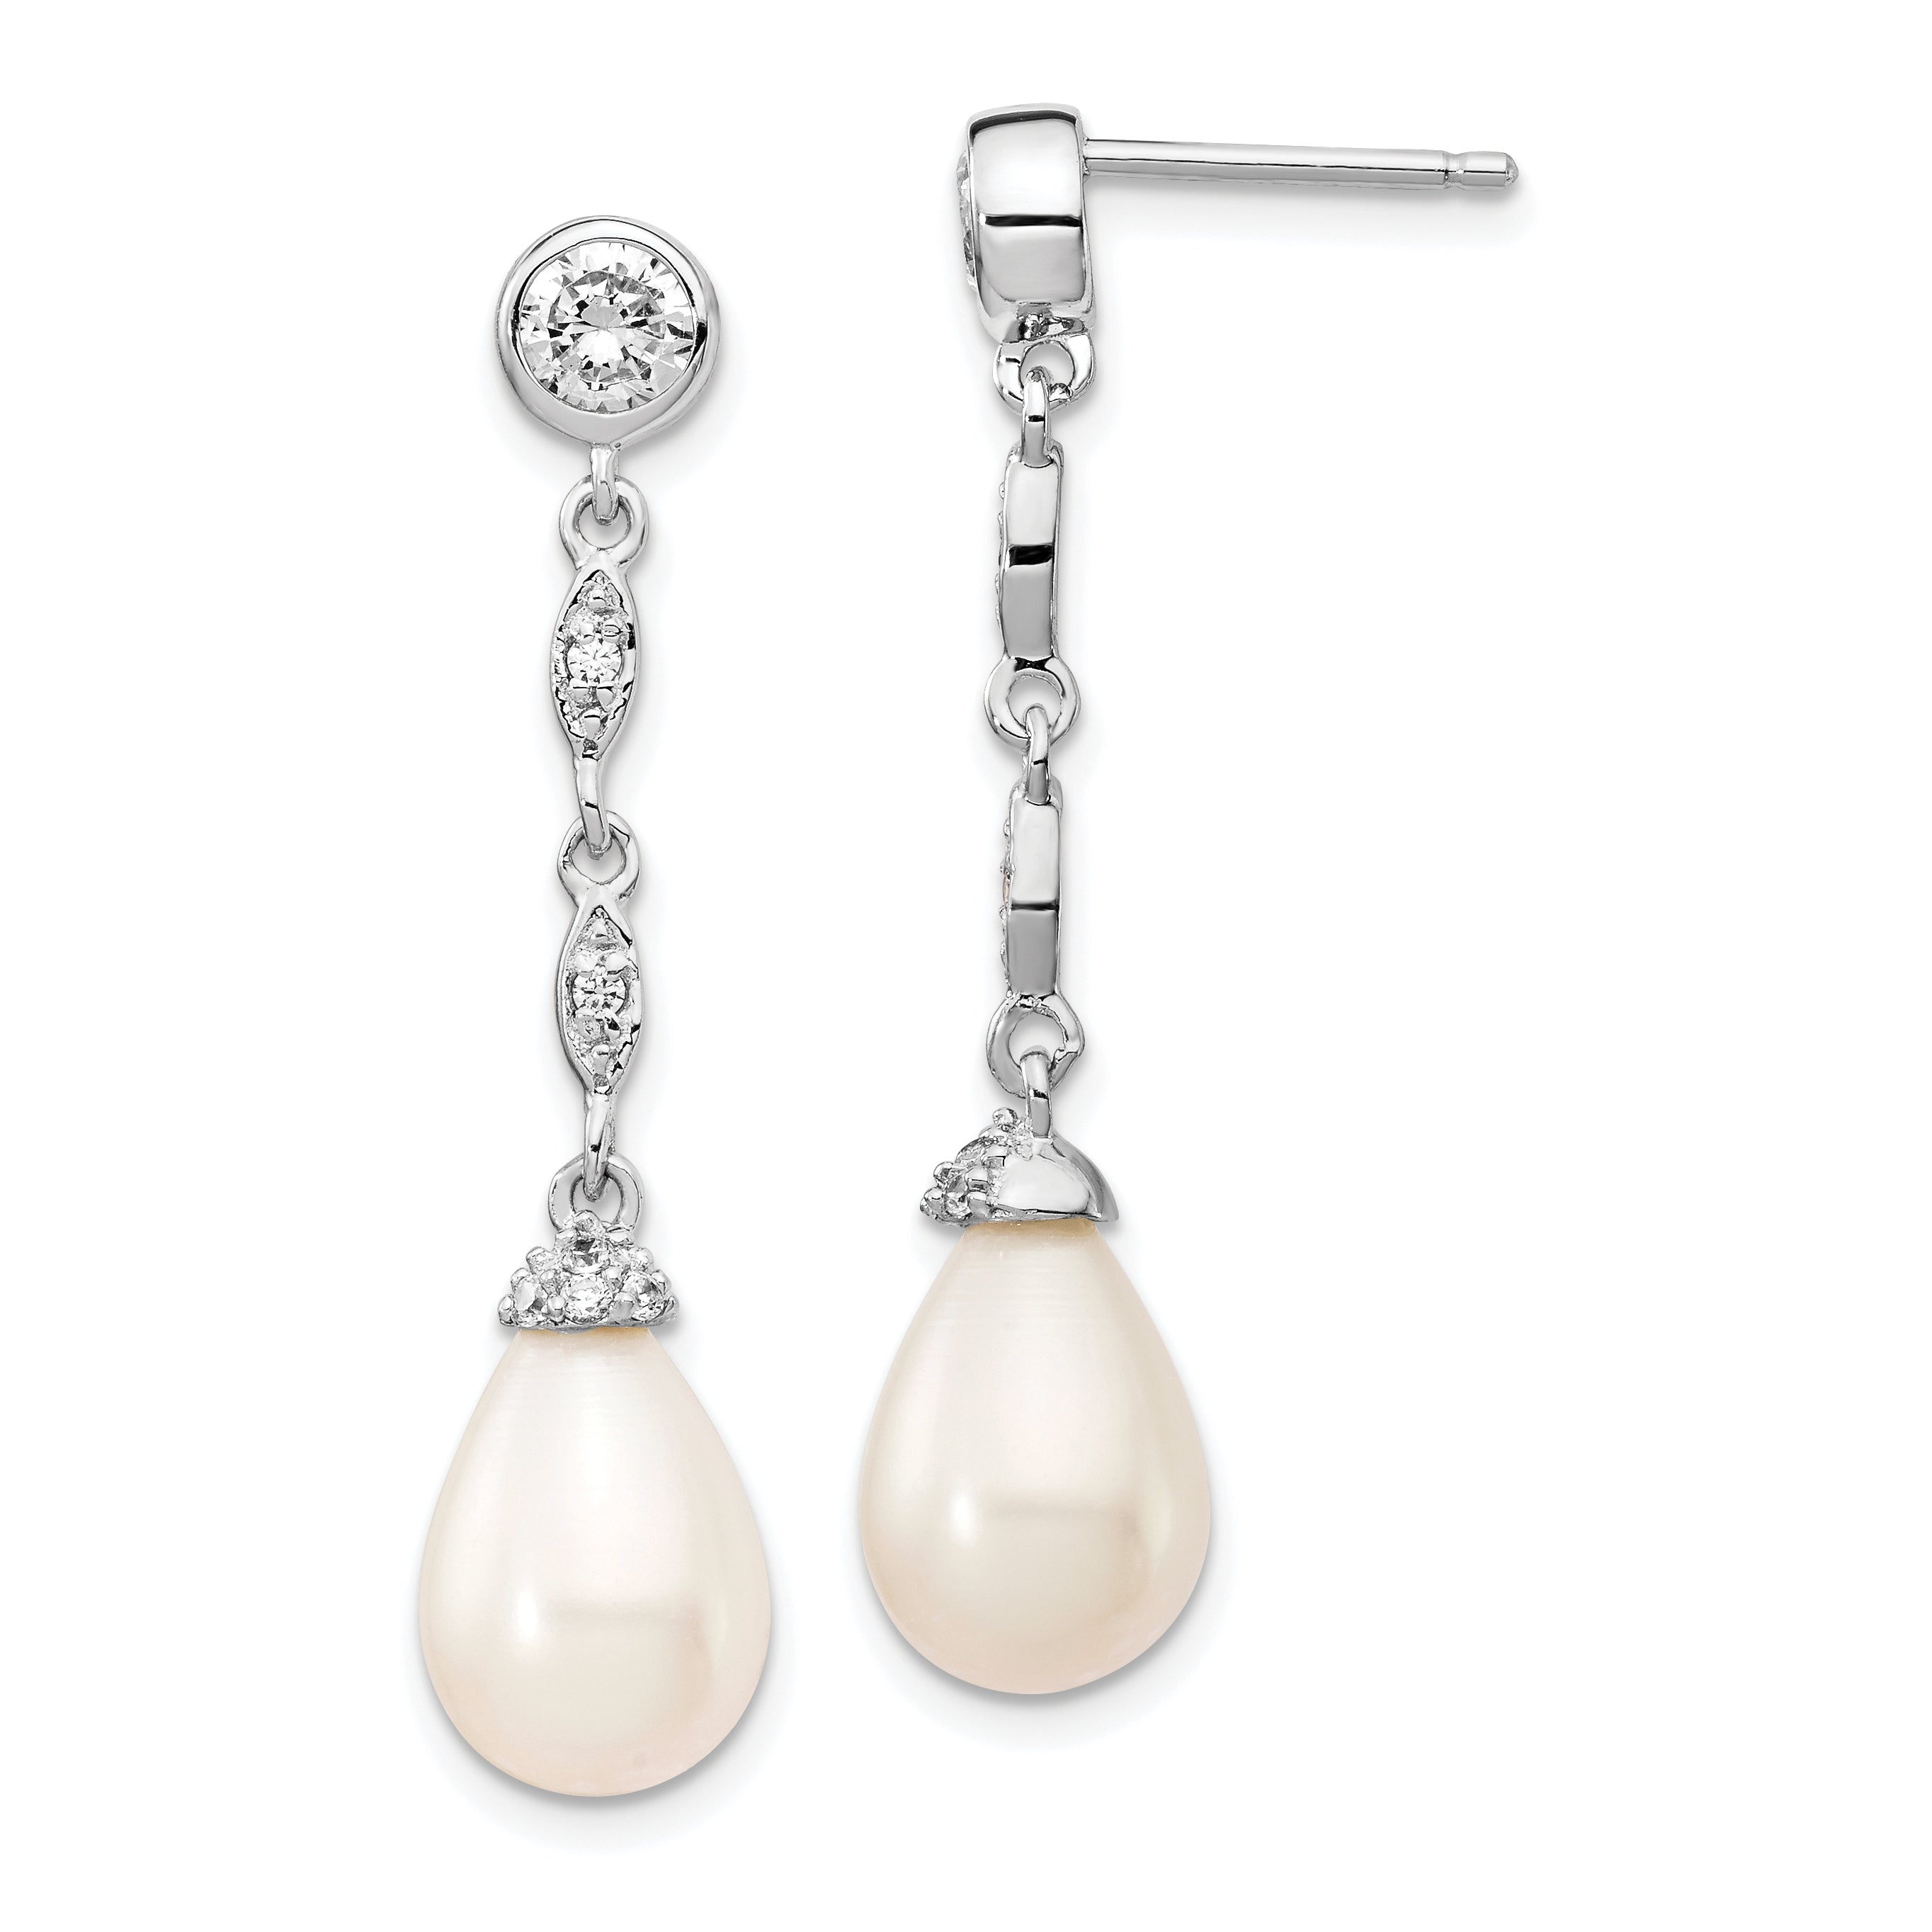 Cheryl M Sterling Silver Rhodium-plated Teardrop Freshwater Cultured Pearl and Brilliant-cut CZ Post Dangle Earrings